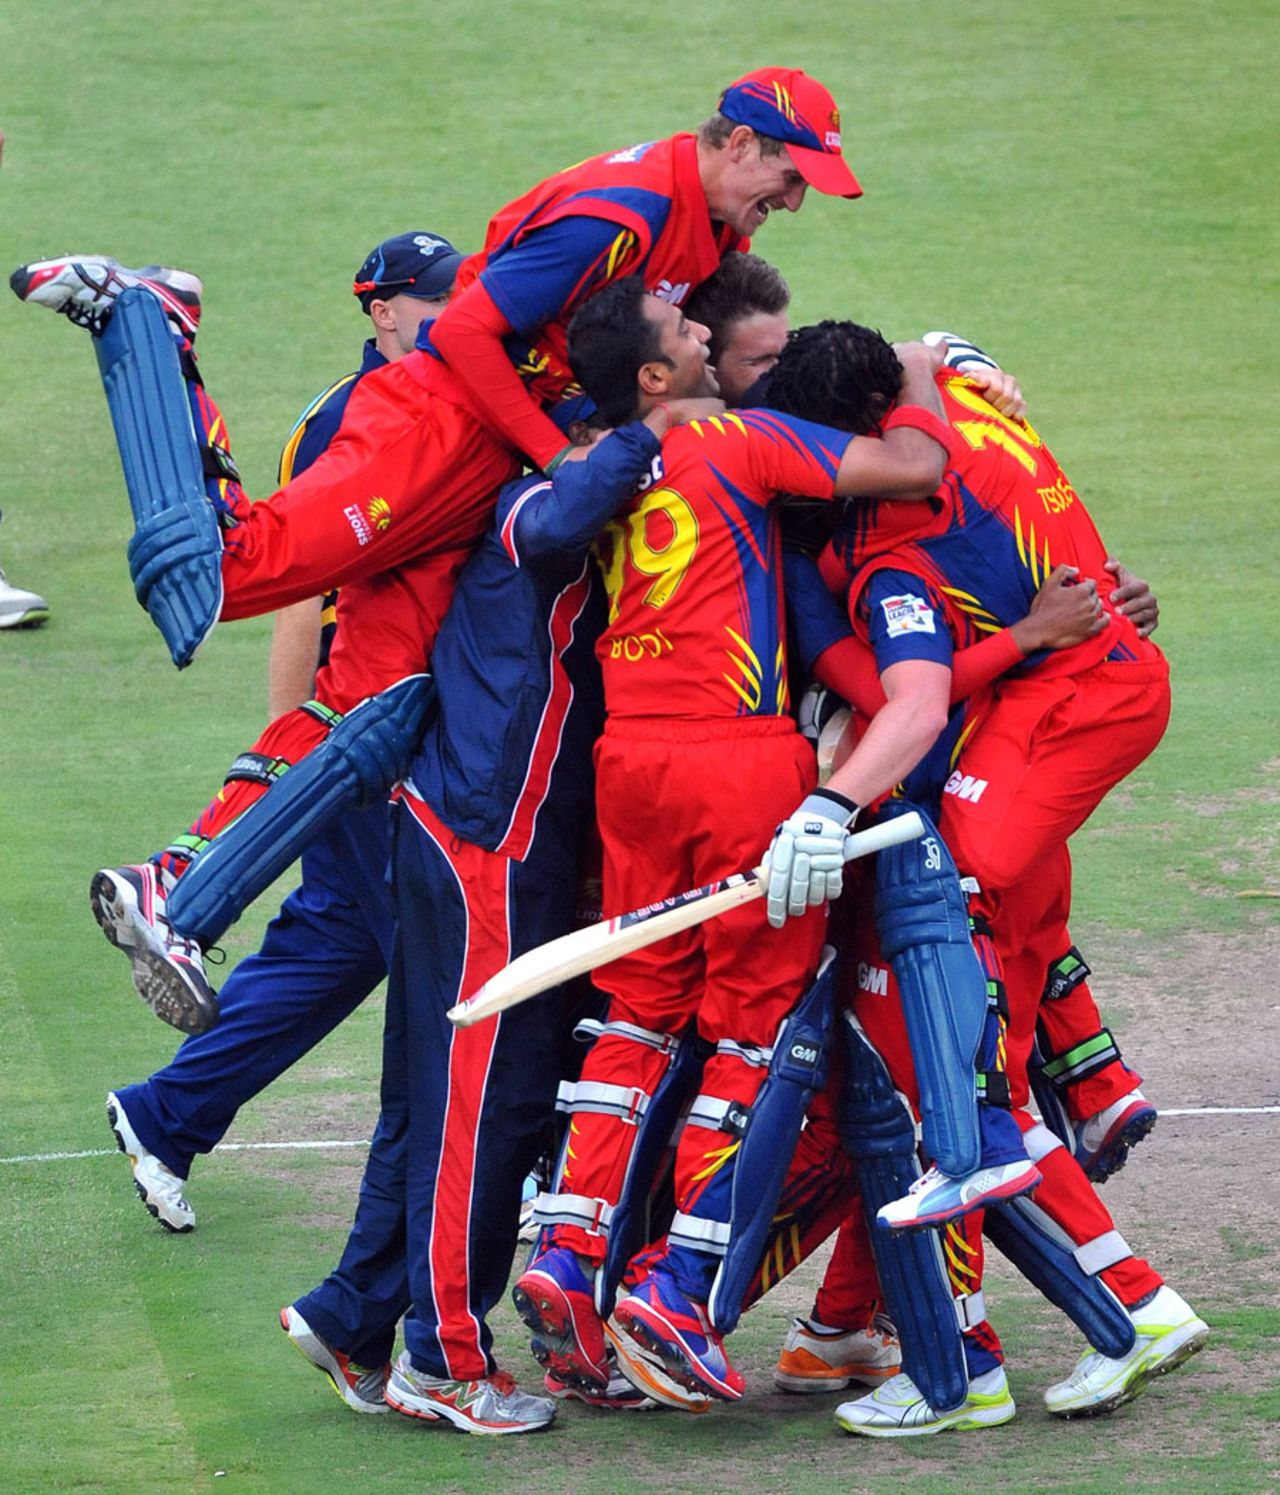 Lions are a picture of joy after qualifying for the semi-finals, Lions v Yorkshire, Champions League T20, Group B, Johannesburg, October 20, 2012